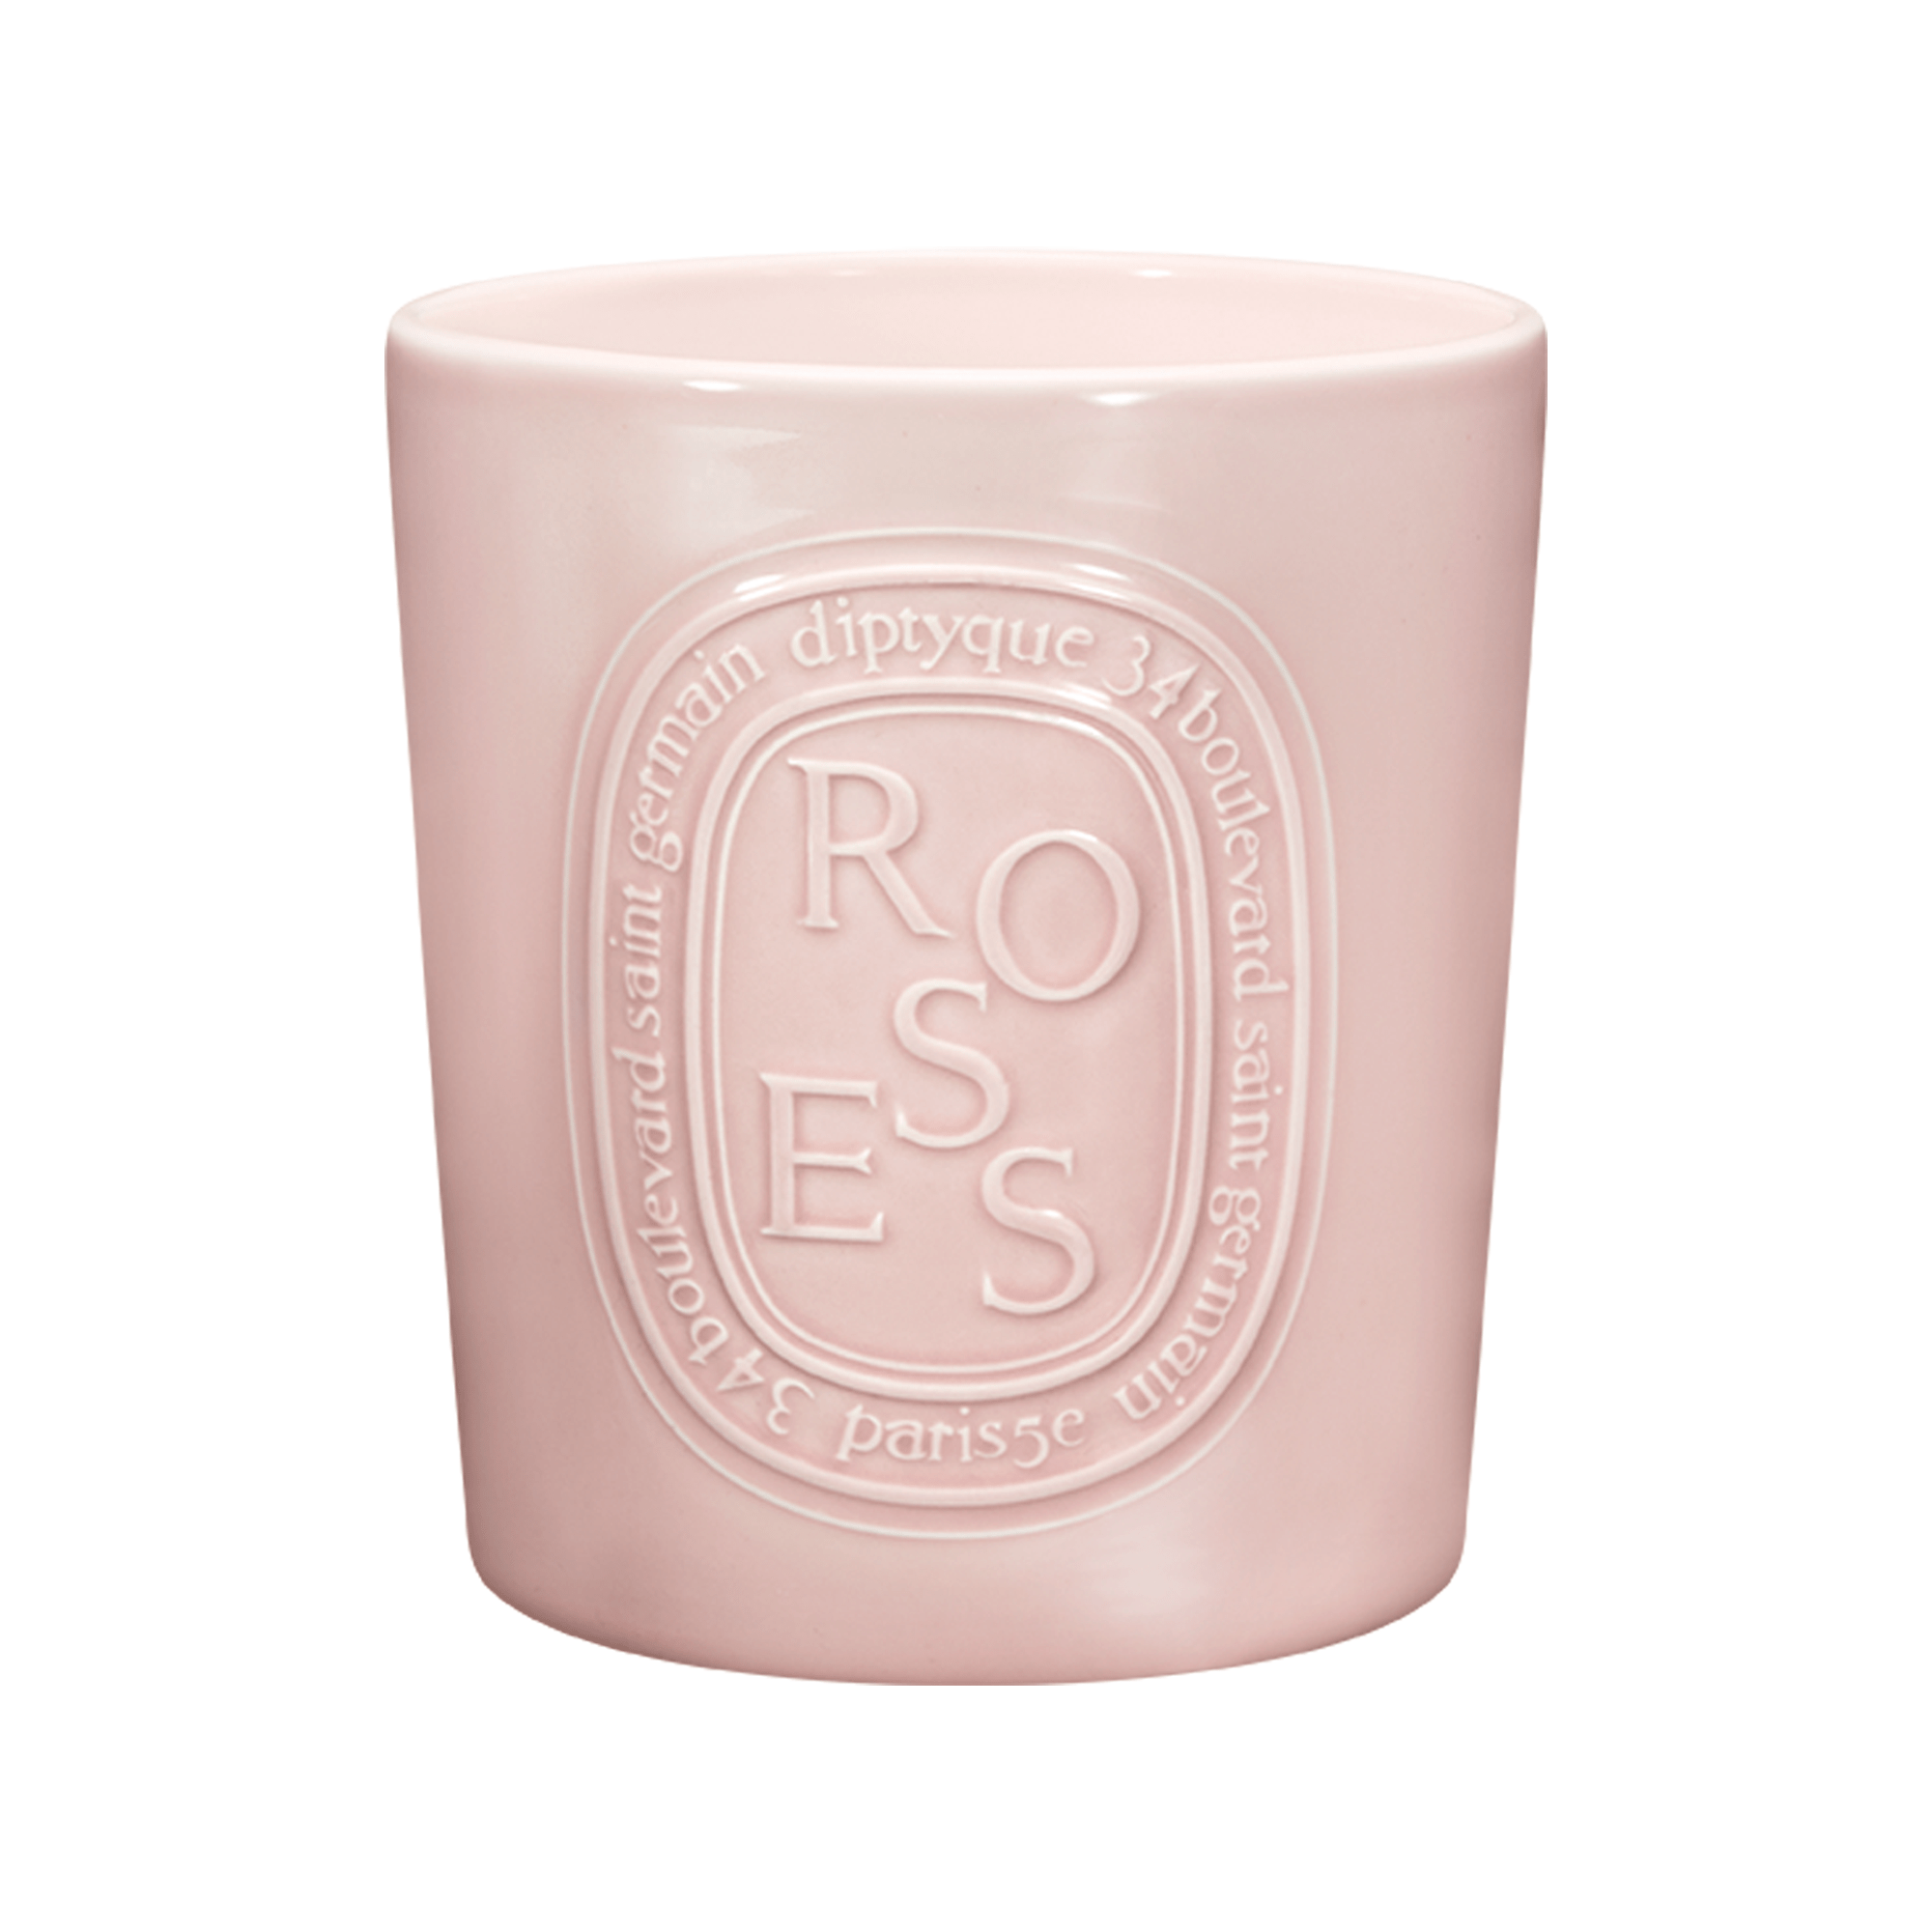 Roses Diptyque Scented Candle